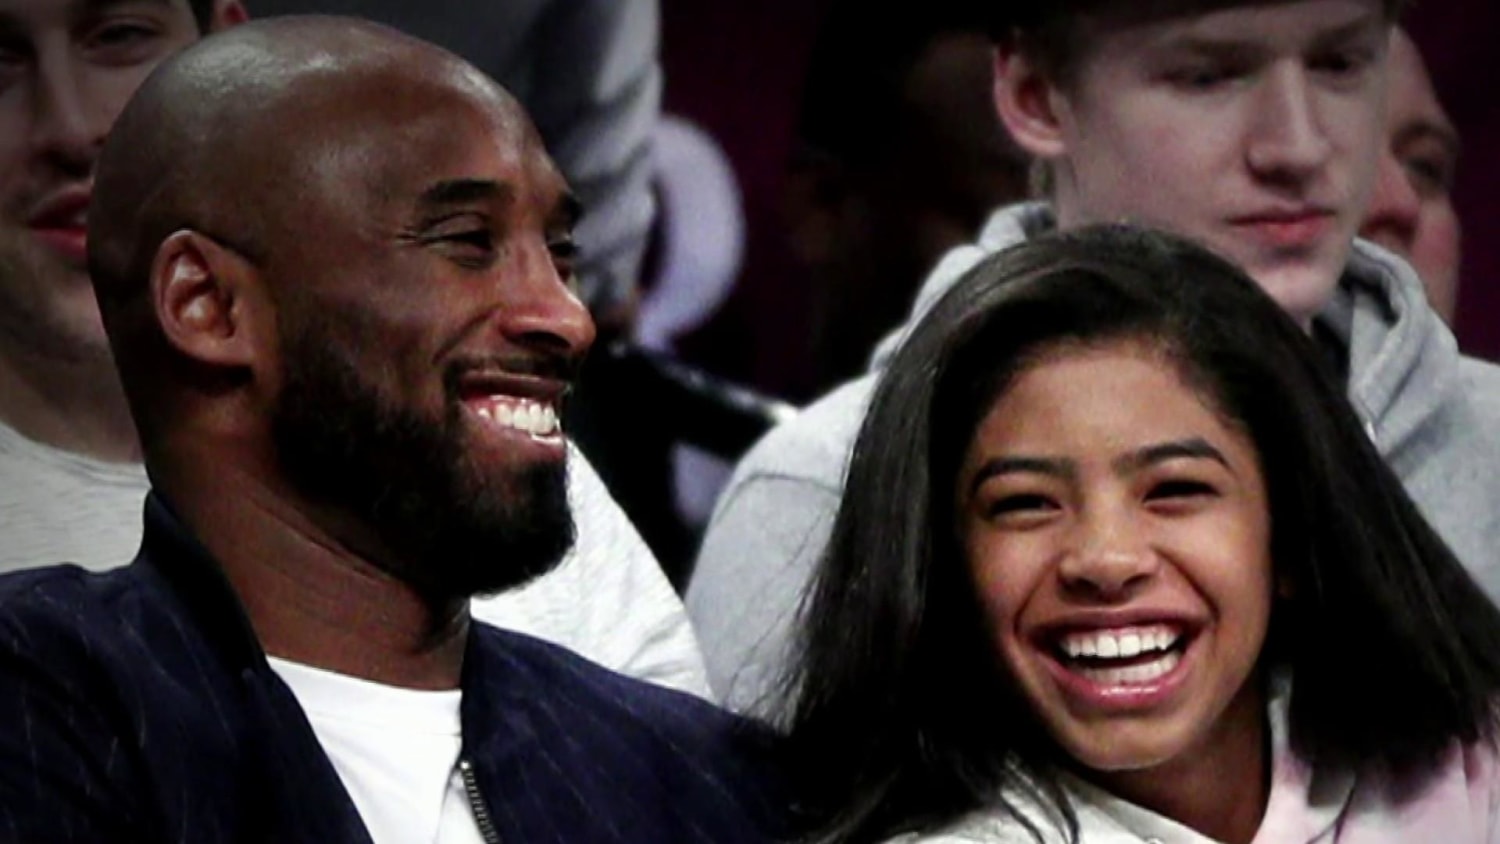 Vanessa Bryant honors Kobe Bryant in emotional tribute at Hall of Fame  induction